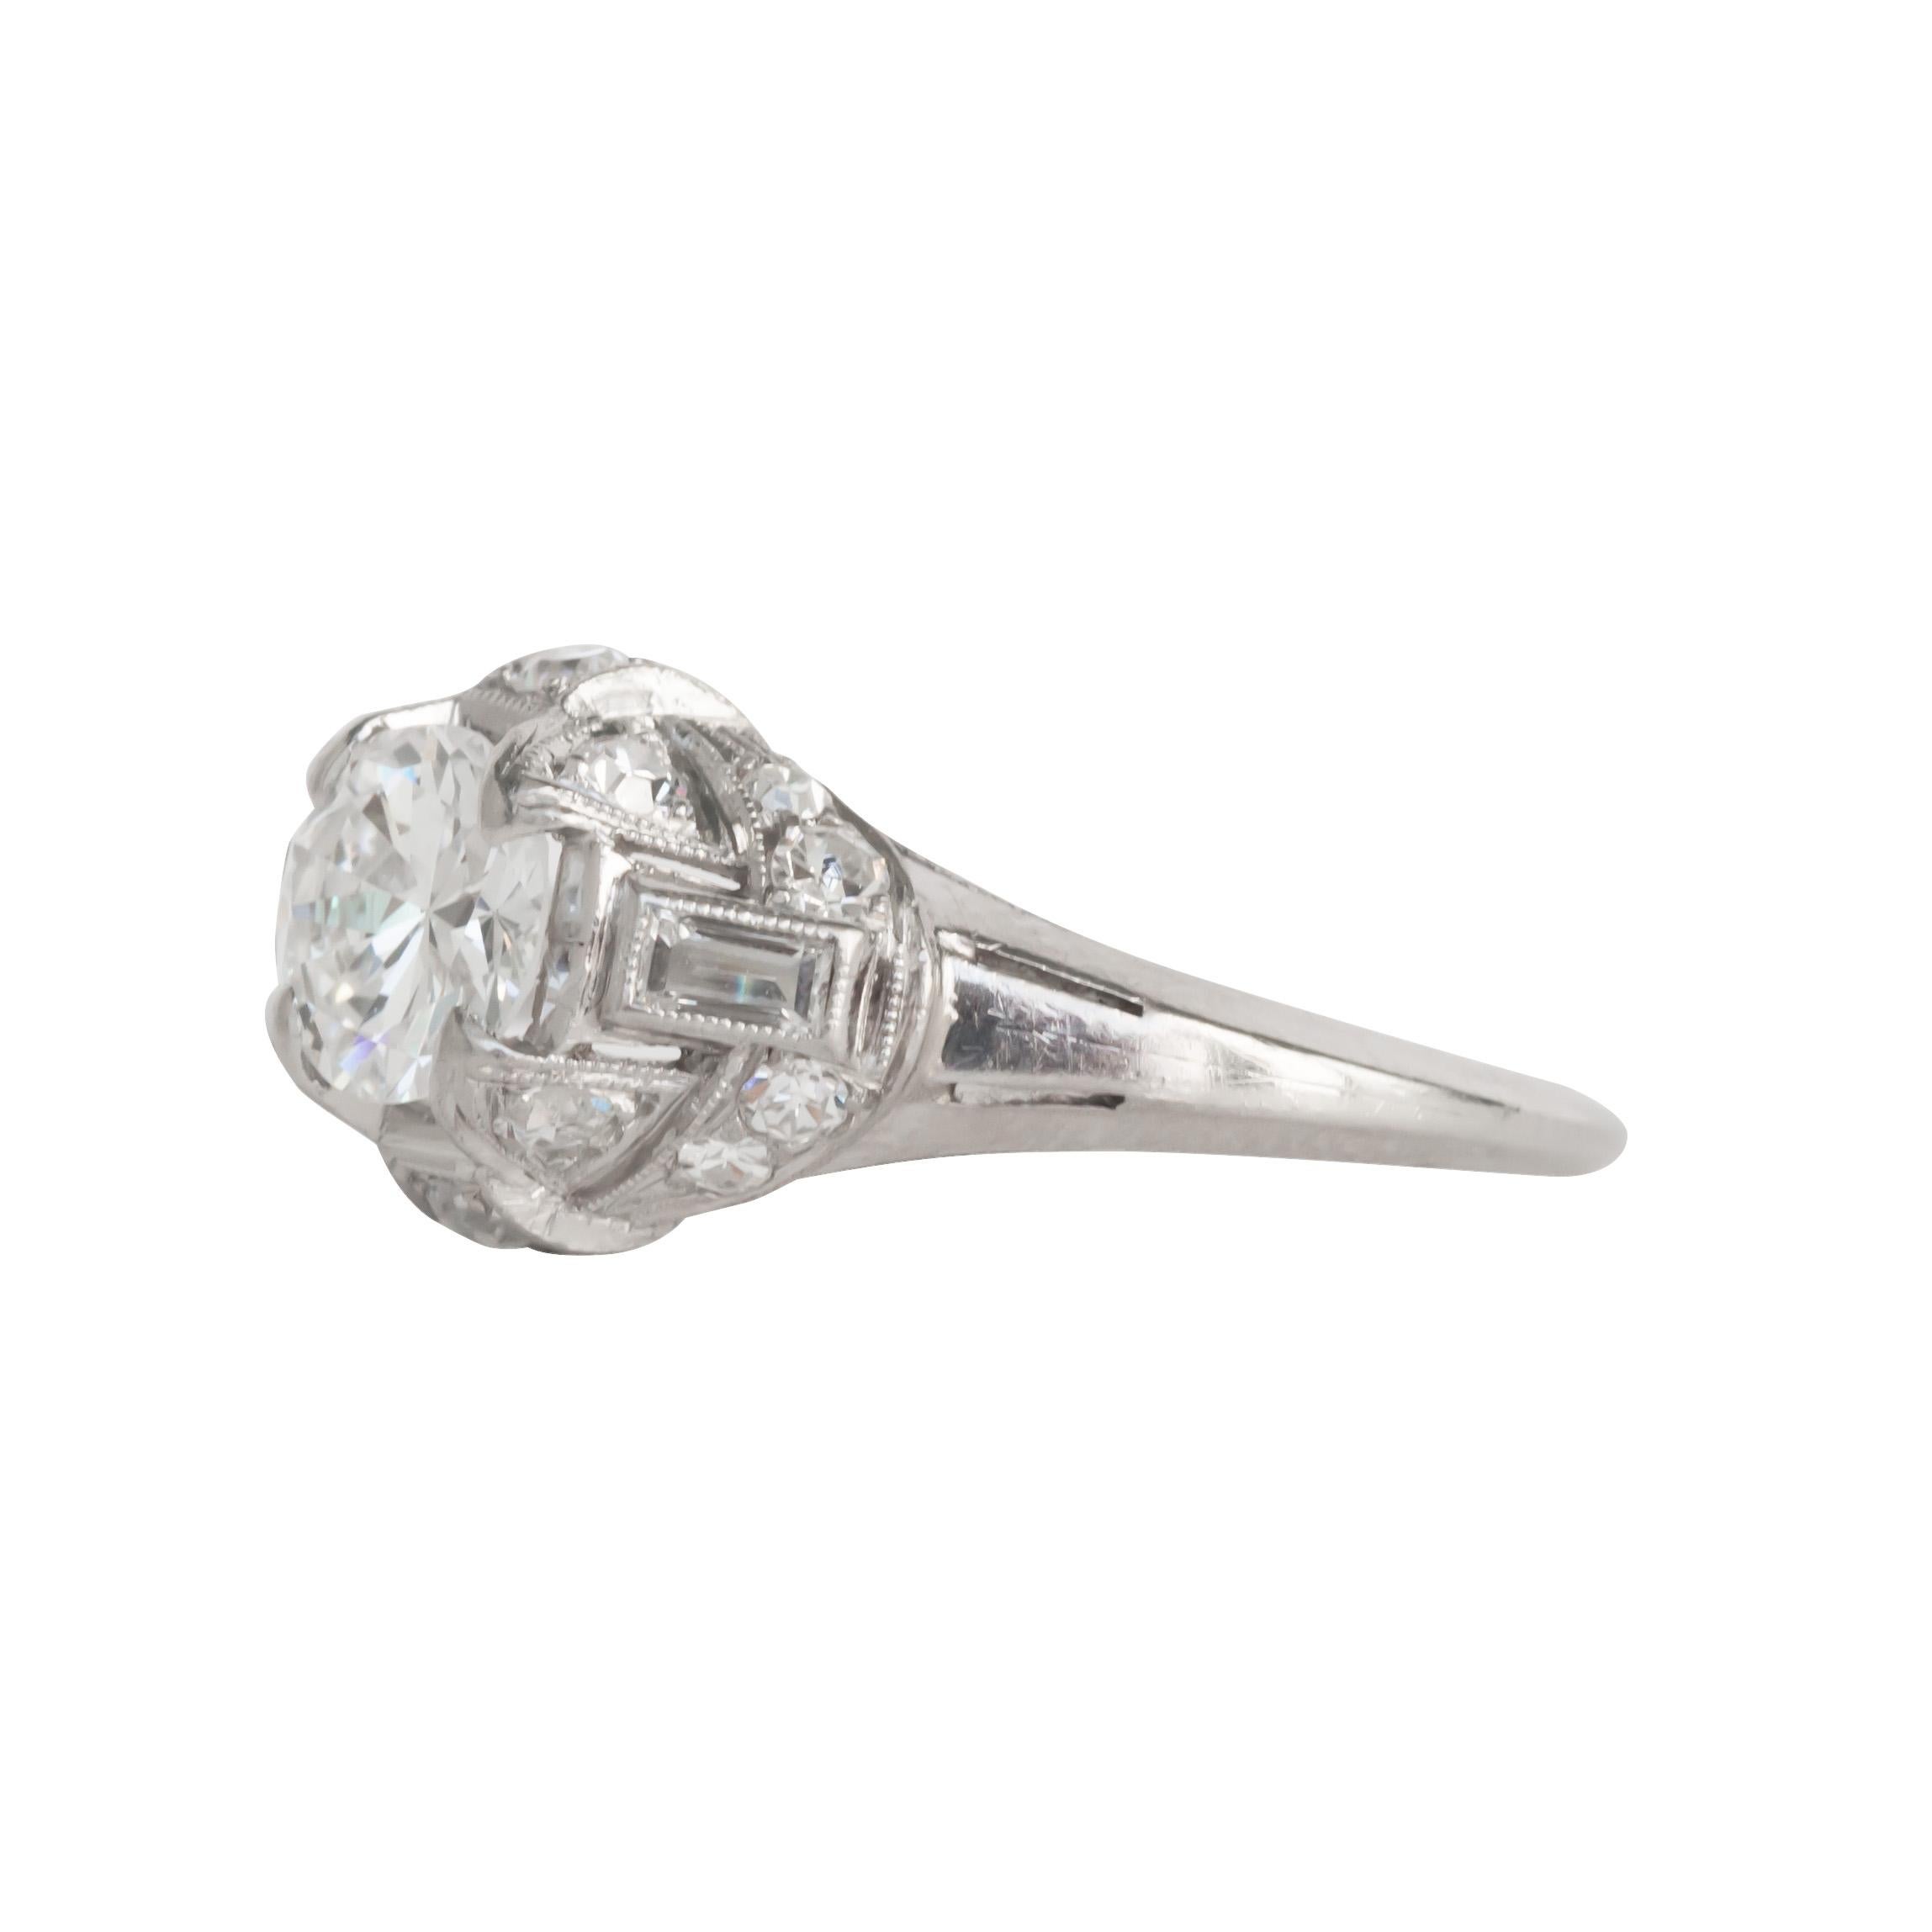 Ring Size: 6.75
Metal Type: Platinum [Hallmarked, and Tested]
Weight: 3.8  grams

Center Diamond Details:
Weight: .80 carat
Cut: Transitional European Cut
Color: E-F
Clarity: SI1

Side Diamond Details:
Weight: .15 carat, total weight
Cut: Antique